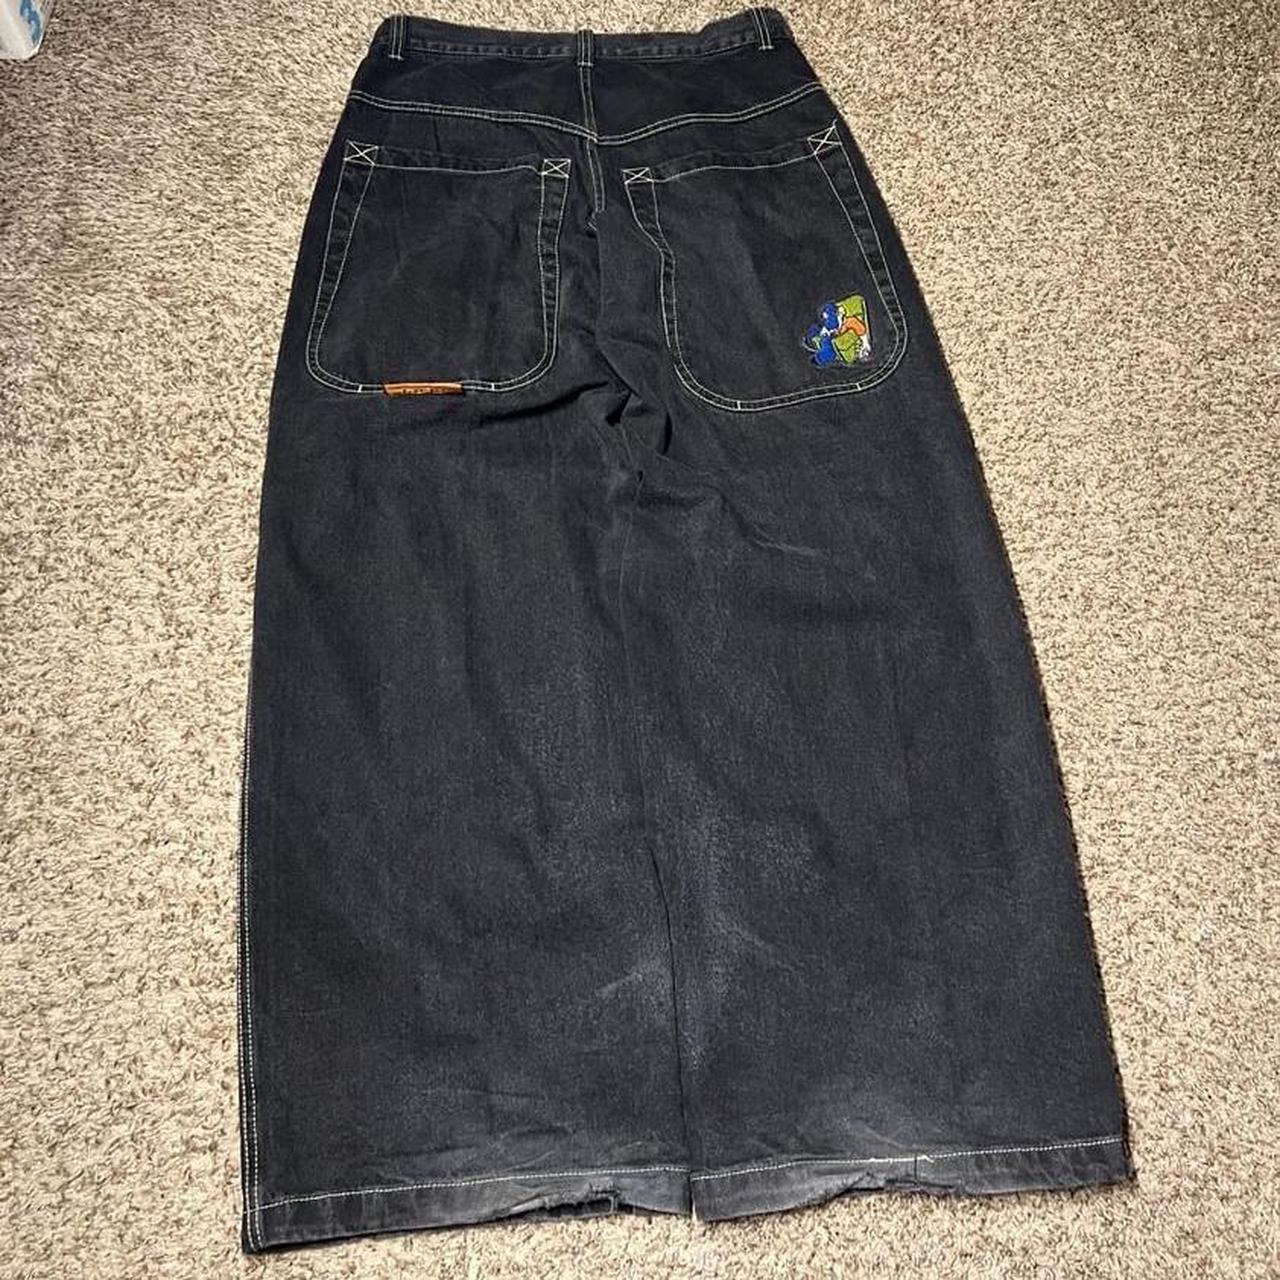 JNCO slackers Black 32x32 Up for grabs so whoever... - Depop